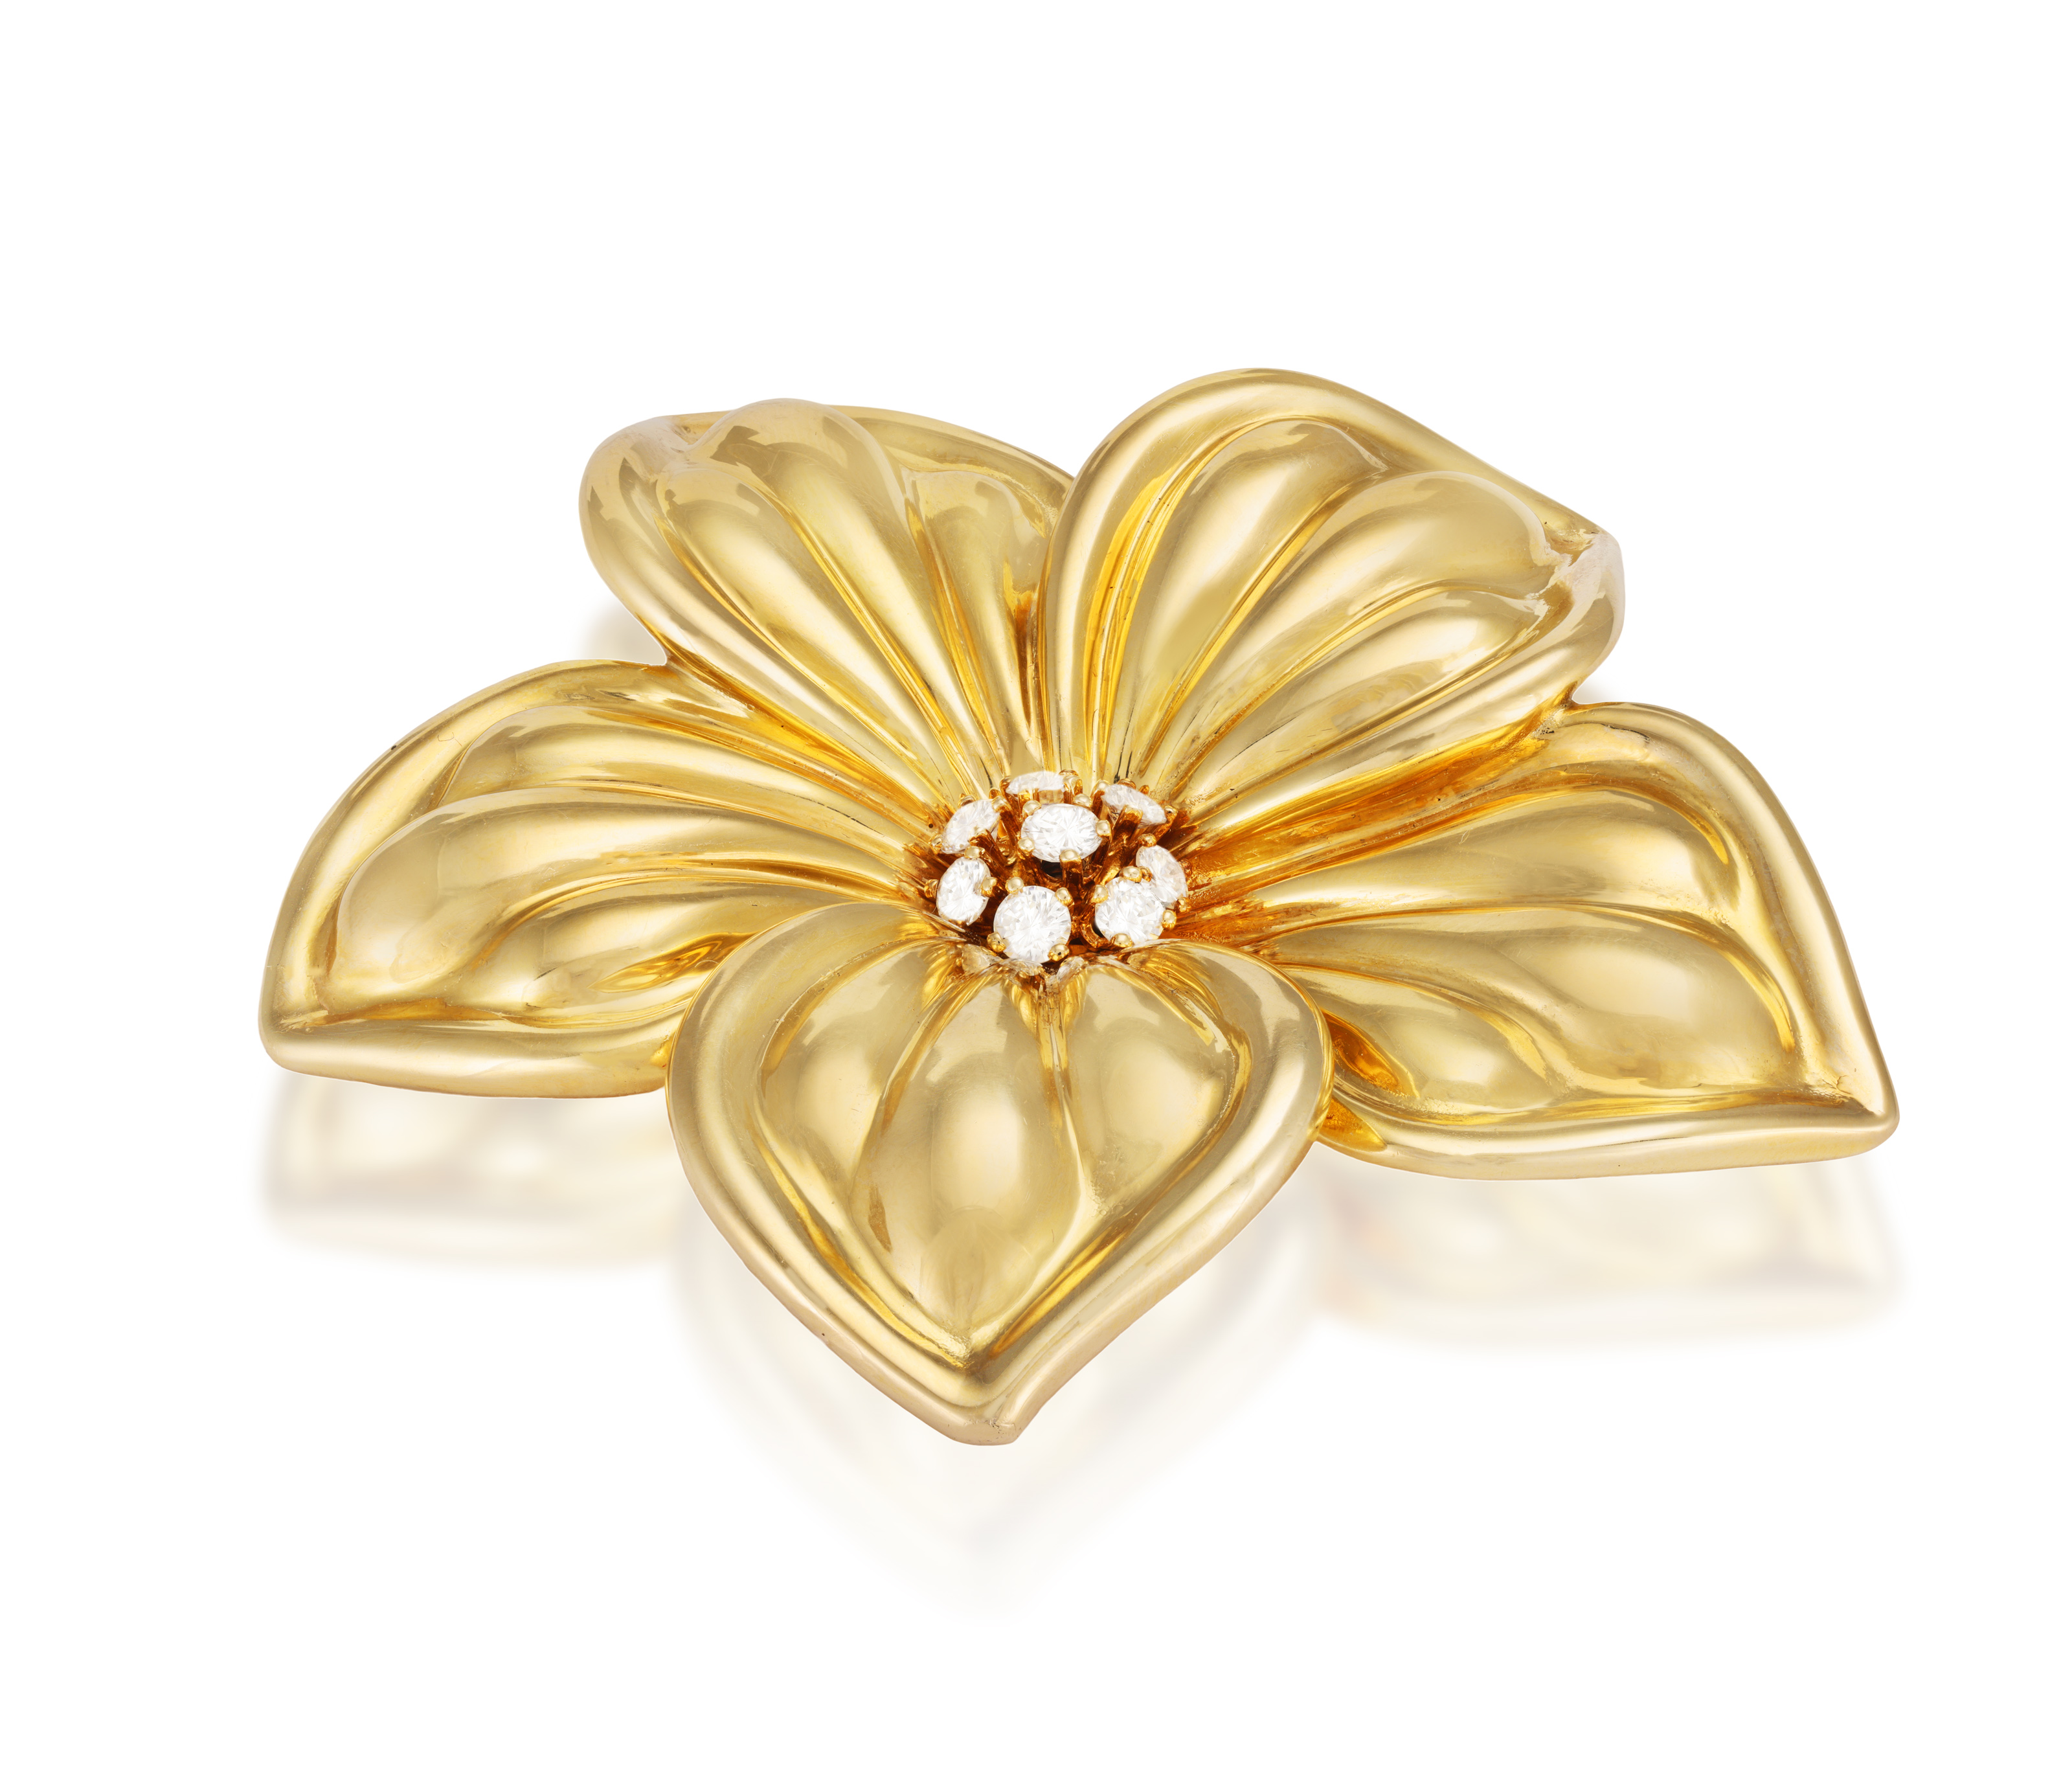 A DIAMOND 'DIANA' BROOCH, BY VAN CLEEF & ARPELS, CIRCA 1990 Designed as a sculpted flowerhead, the - Image 2 of 5